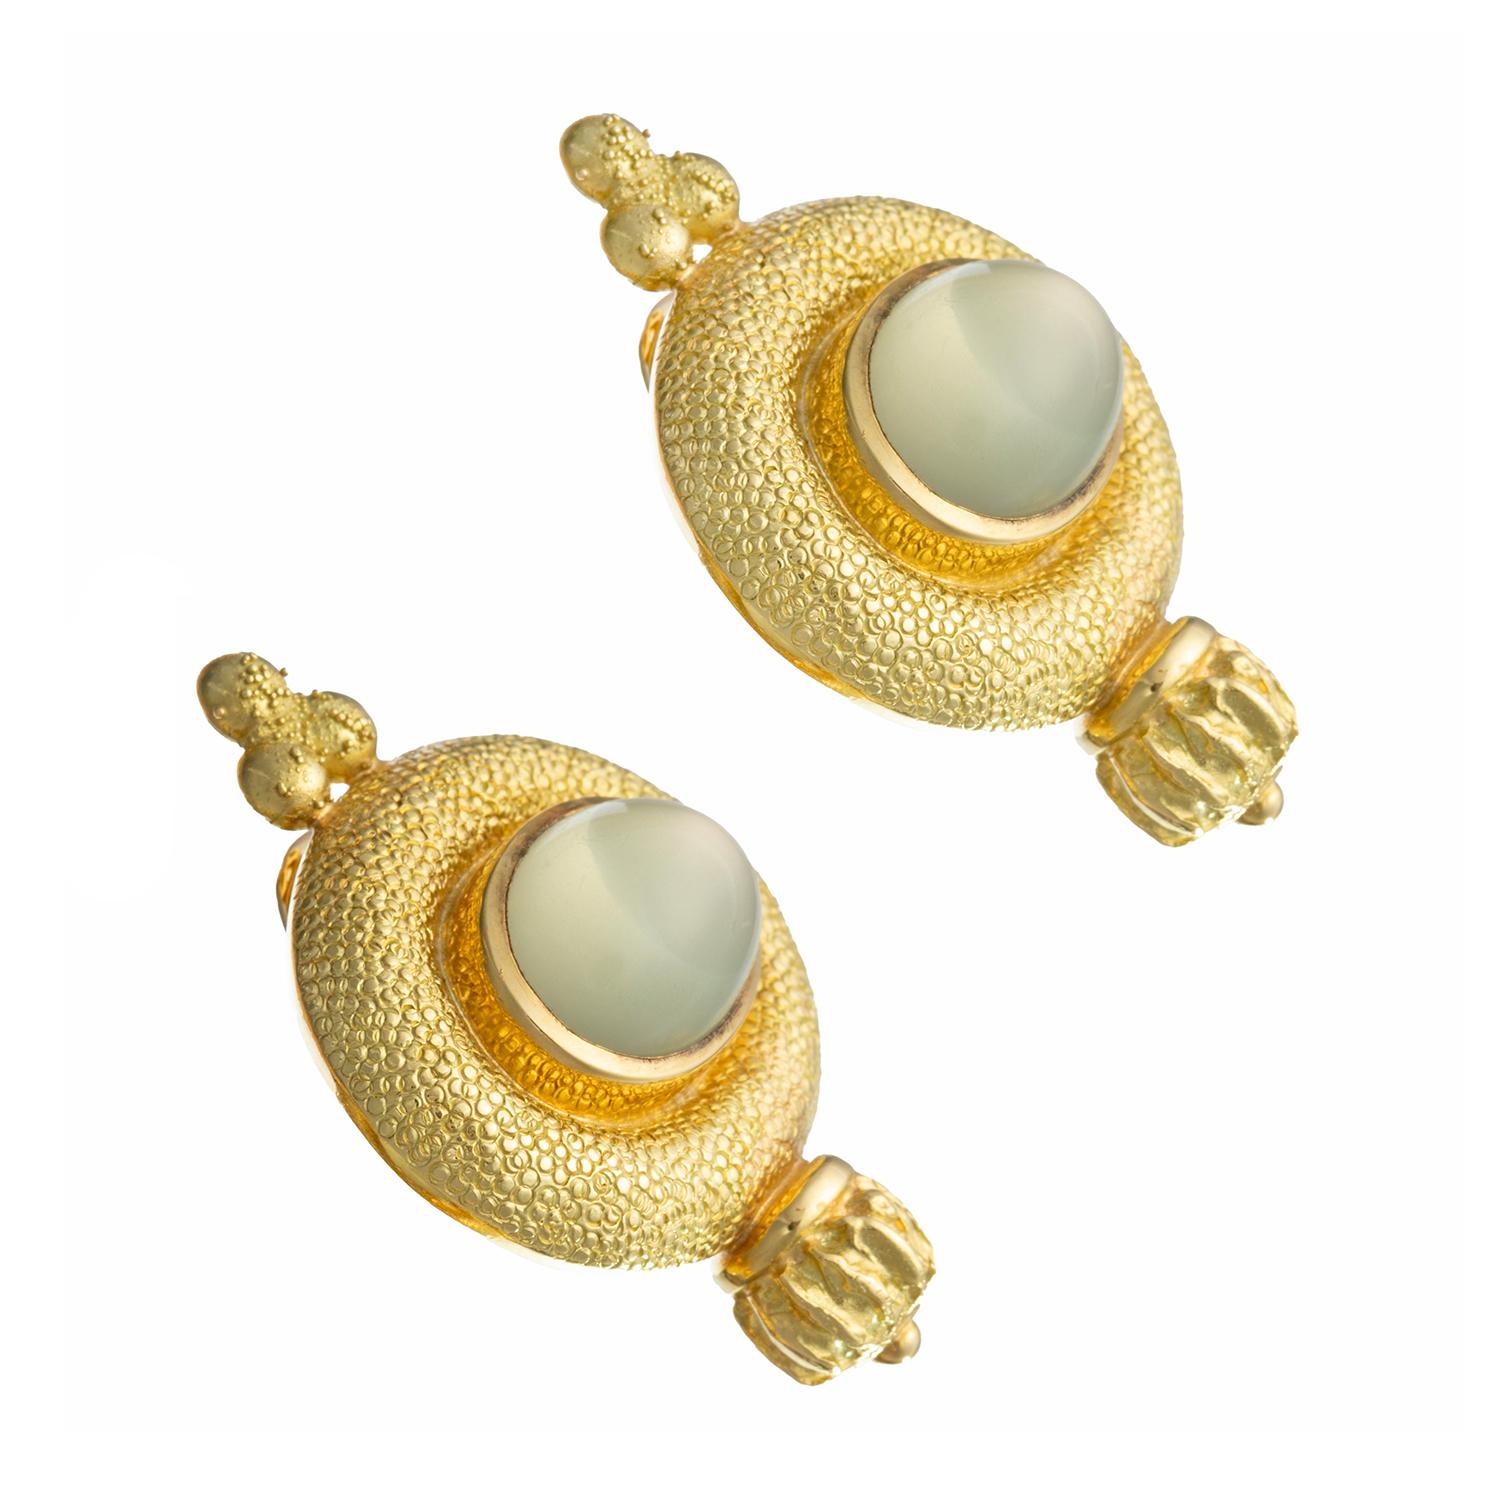 London-based designer Elizabeth Gage clip earrings in hammered 18k yellow gold each centering a bezel-set 15 x 10mm cabochon-cut prasiolite with a crown motif at the bottom.  Signed 'GAGE' 'EG 750' © with English makers' marks.  Earring dimensions: